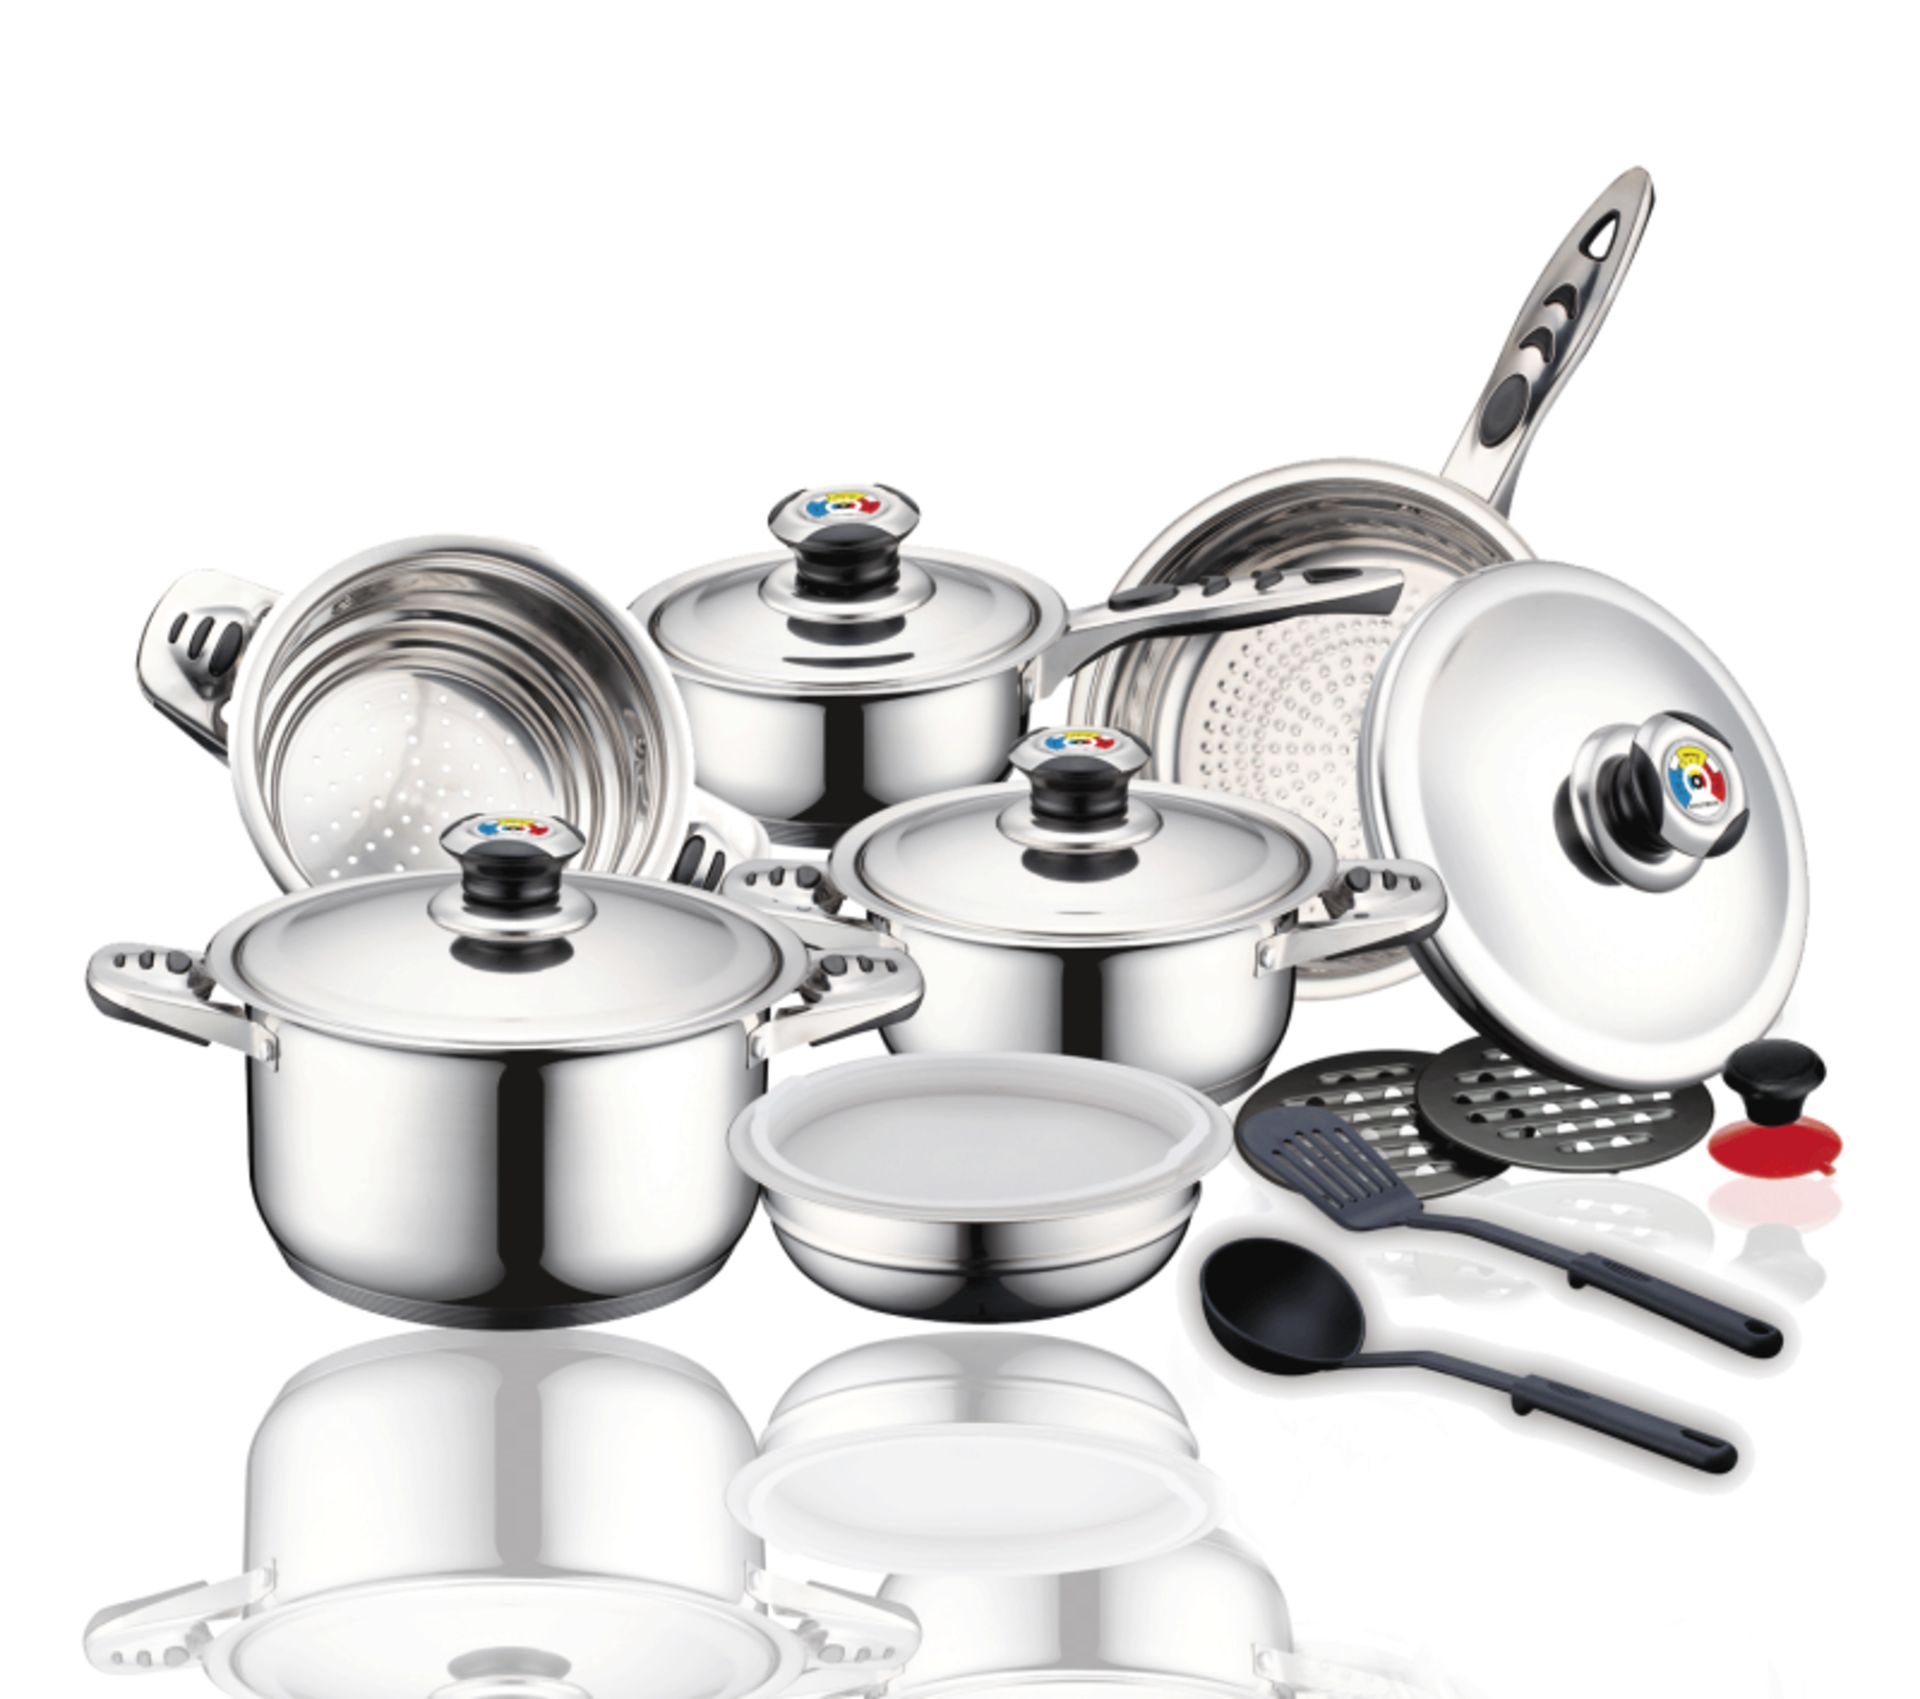 V Brand New 16pce Stainless Steel Cookware Set Including Ceramic Coated Fry Pan RRP 1299Euro